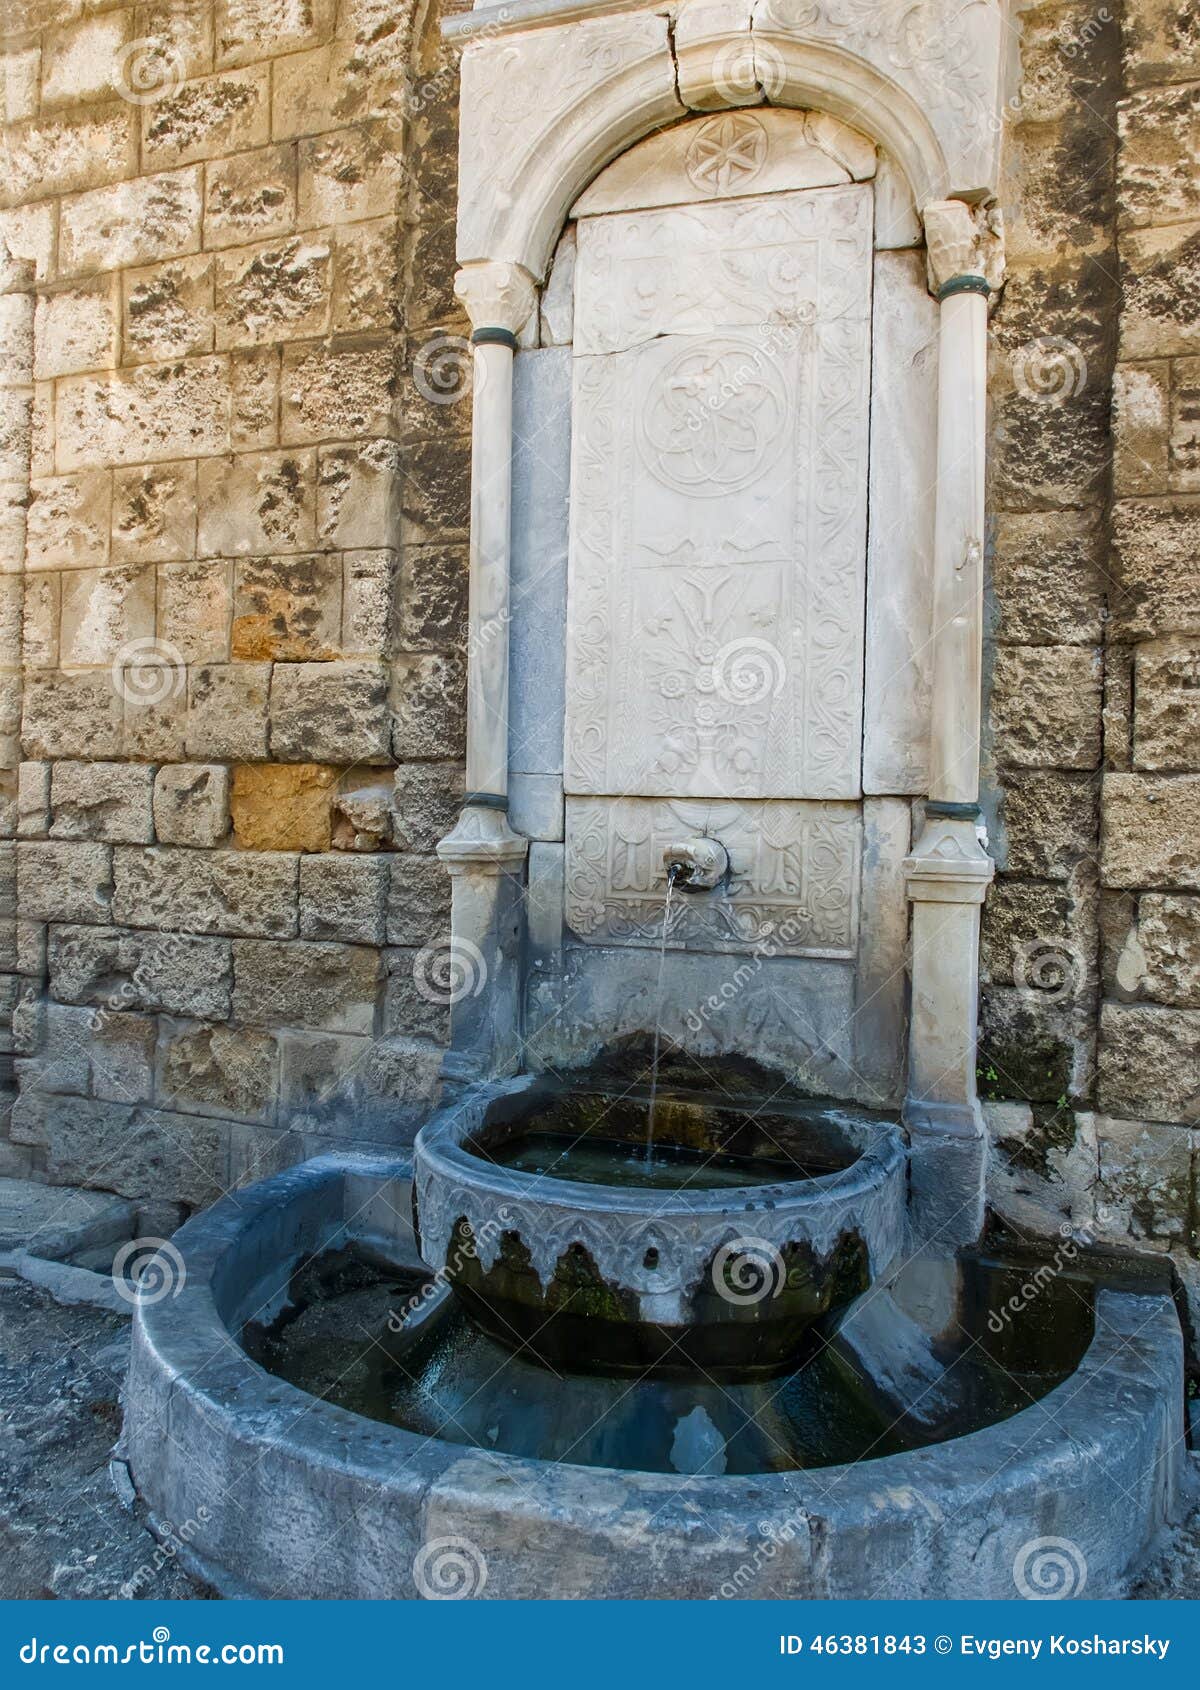 An Ancient Medieval Drinking Fountain Stock Image - Image of mantel